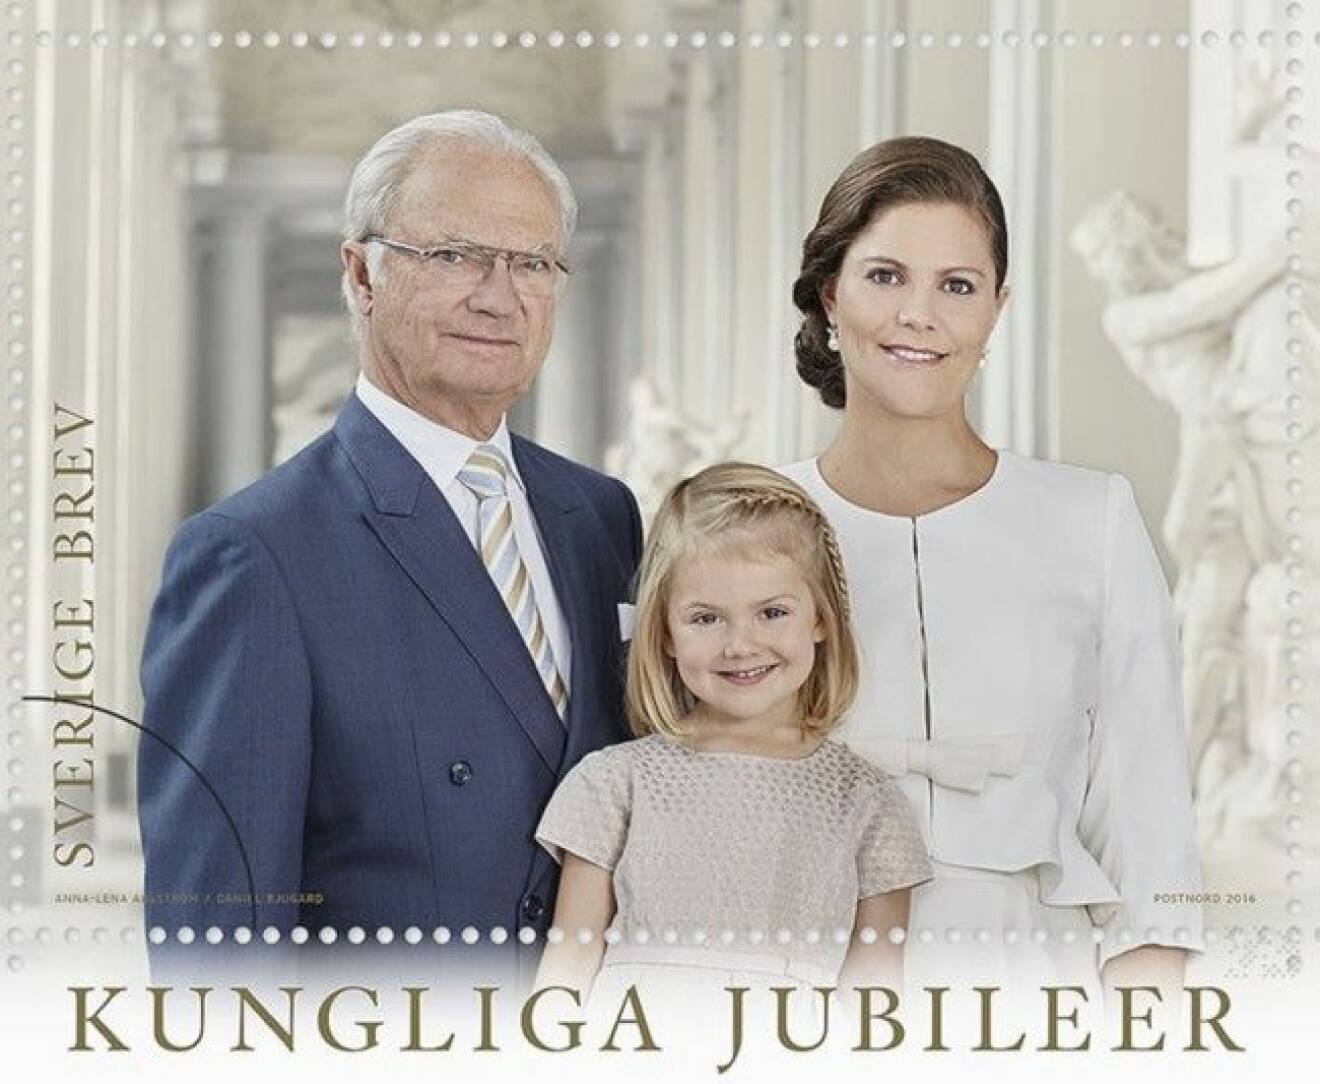 NO CREDIT - New photos of the Swedish royal family stamps have been released with Princess Estelle. The adorable youngster poses with her mum Crown Princess Victoria, who is first-in-line to the throne, and her grandfather King Carl XVI Gustaf, who is Sweden's current monarch. The photos were released to celebrate Estelle's fourth birthday, which took place on Tuesday. They also mark King Carl's upcoming 70th birthday, which is in April. Carl Gustav de Suede;Victoria de Suede;Estelle de Suede IBL *** Local Caption *** 7.07752652